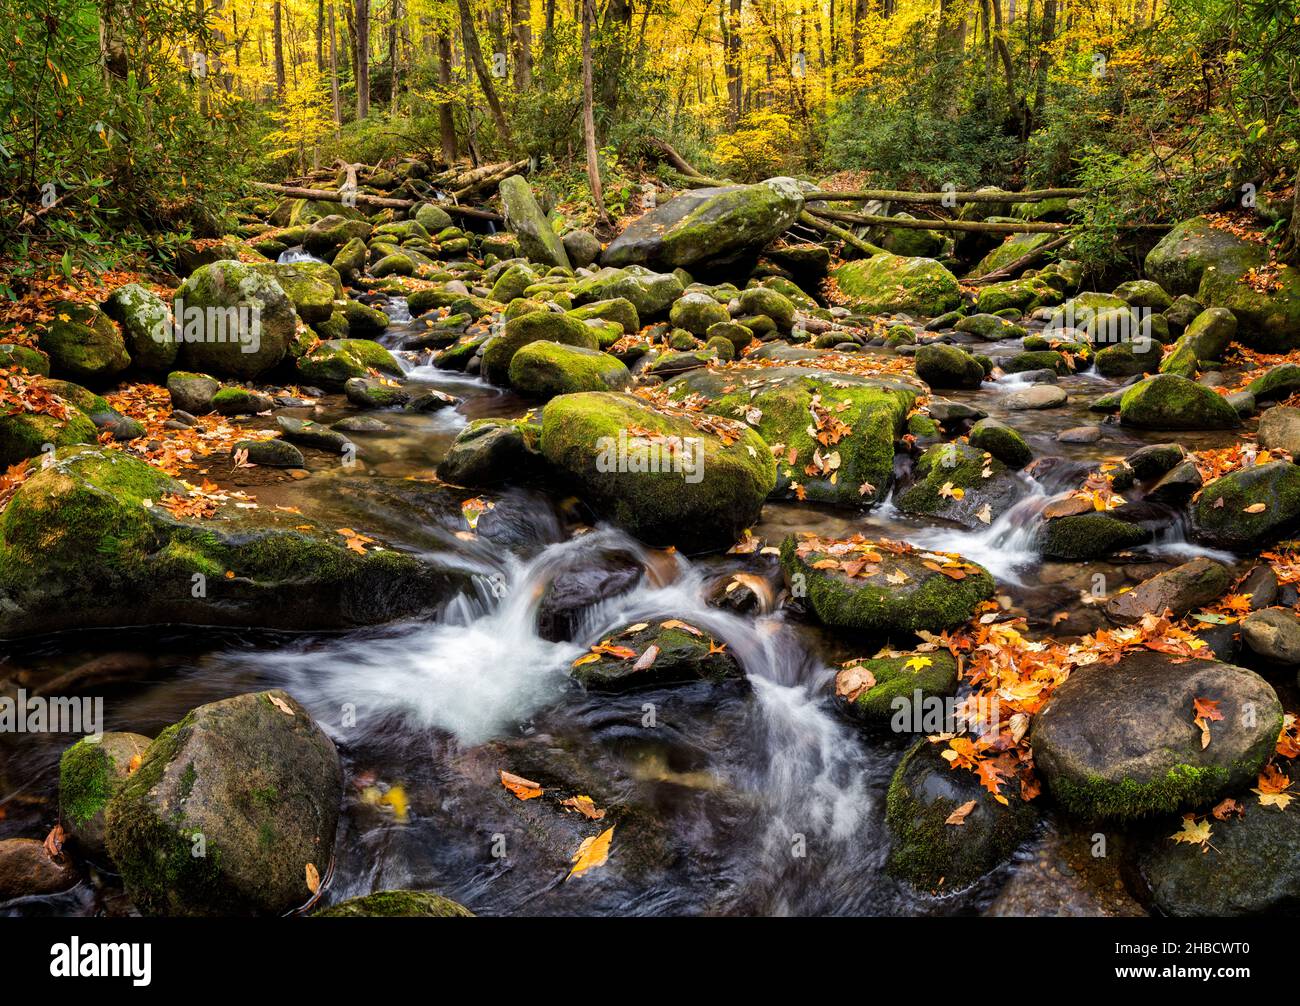 USA, Tennessee, Gatlinburg, Great Smoky Mountains National Park, Flowing creek along the Roaring Fork Motor Nature Trail Stock Photo